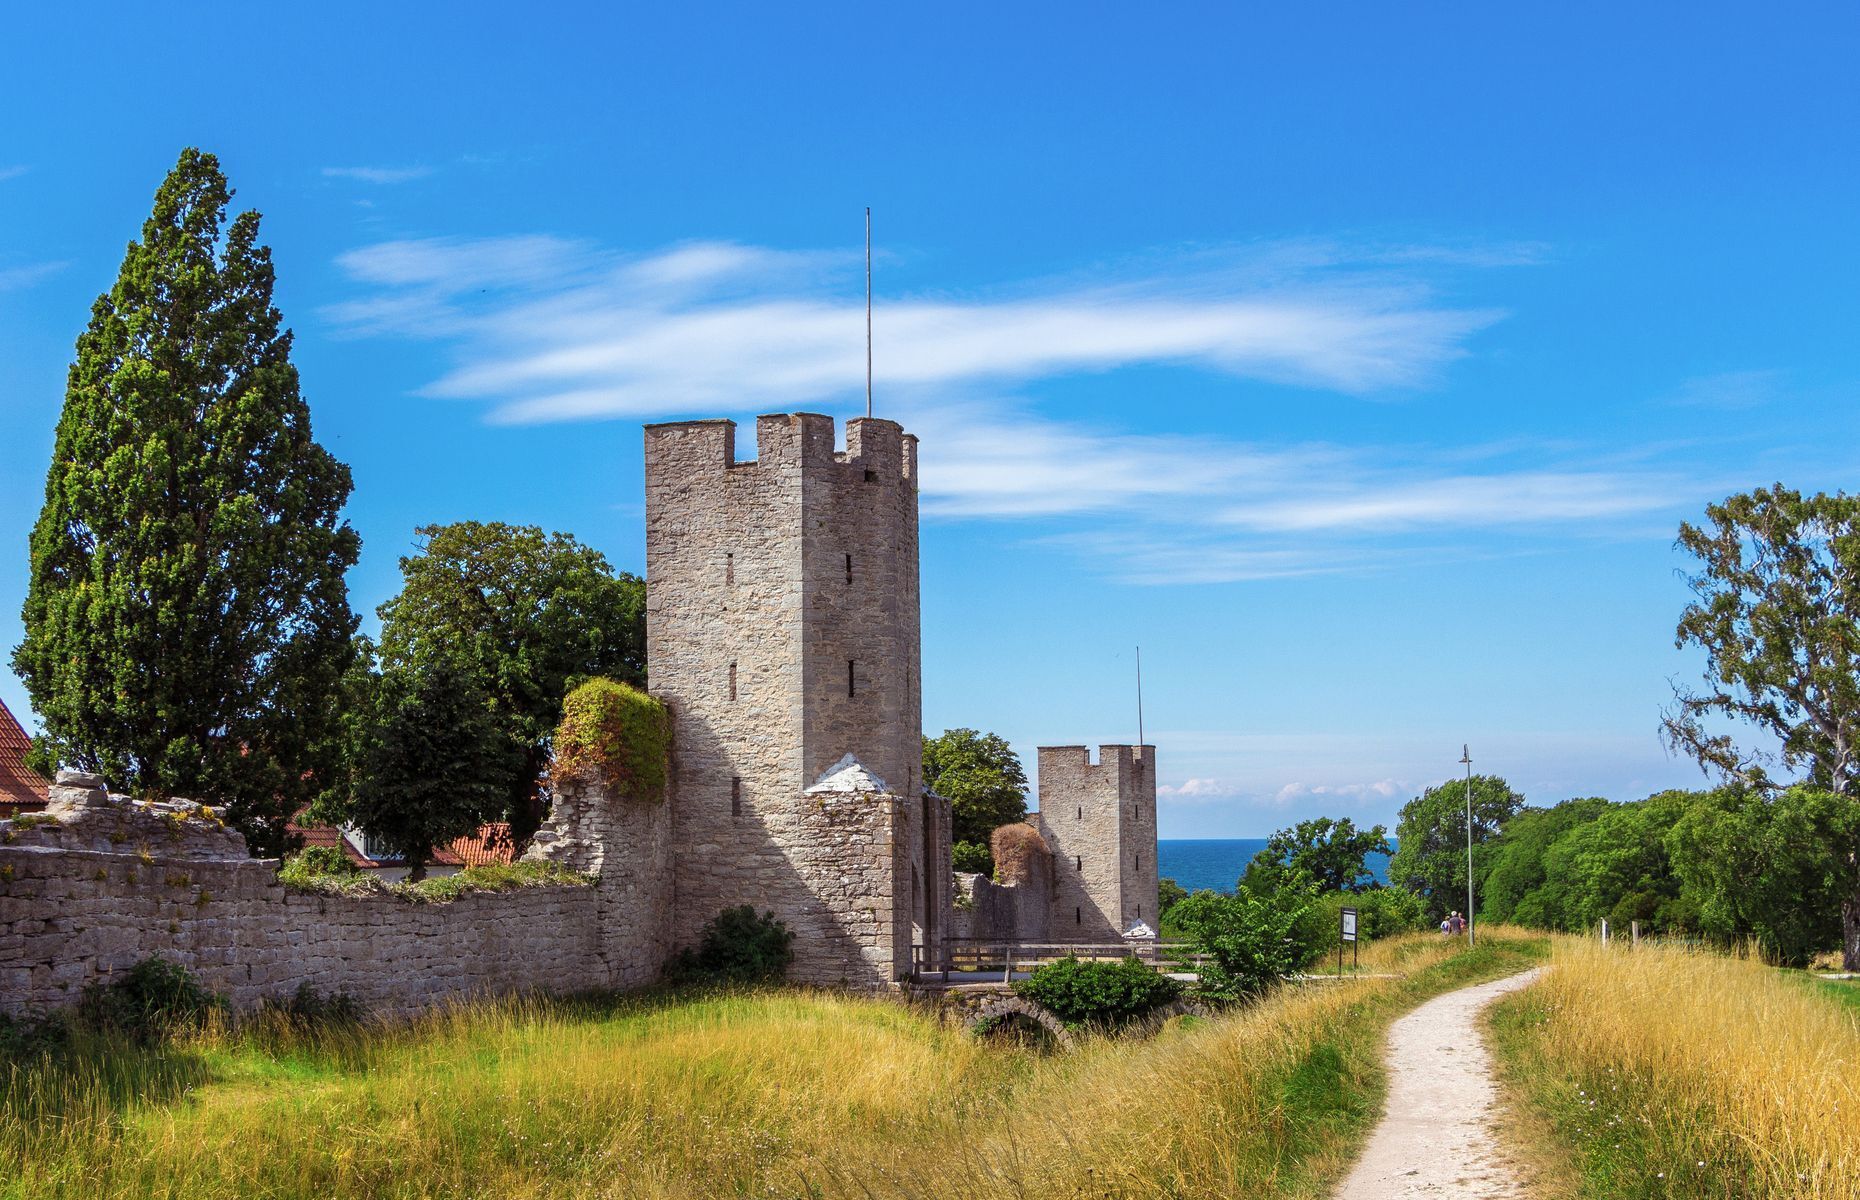 <p>Interested in Vikings? Then be sure to plan a trip to <a href="https://visitsweden.com/where-to-go/southern-sweden/gotland/" rel="noreferrer noopener">Gotland Island</a> while in Sweden. Visitors can tour the old walled city of <a href="https://visitsweden.com/where-to-go/southern-sweden/gotland/visby/" rel="noreferrer noopener">Visby</a> and participate in immersive activities recreating the daily life of these Scandinavian ancestors. Check out medieval markets, mead tasting, jousting tournaments, and traditional parades.</p>